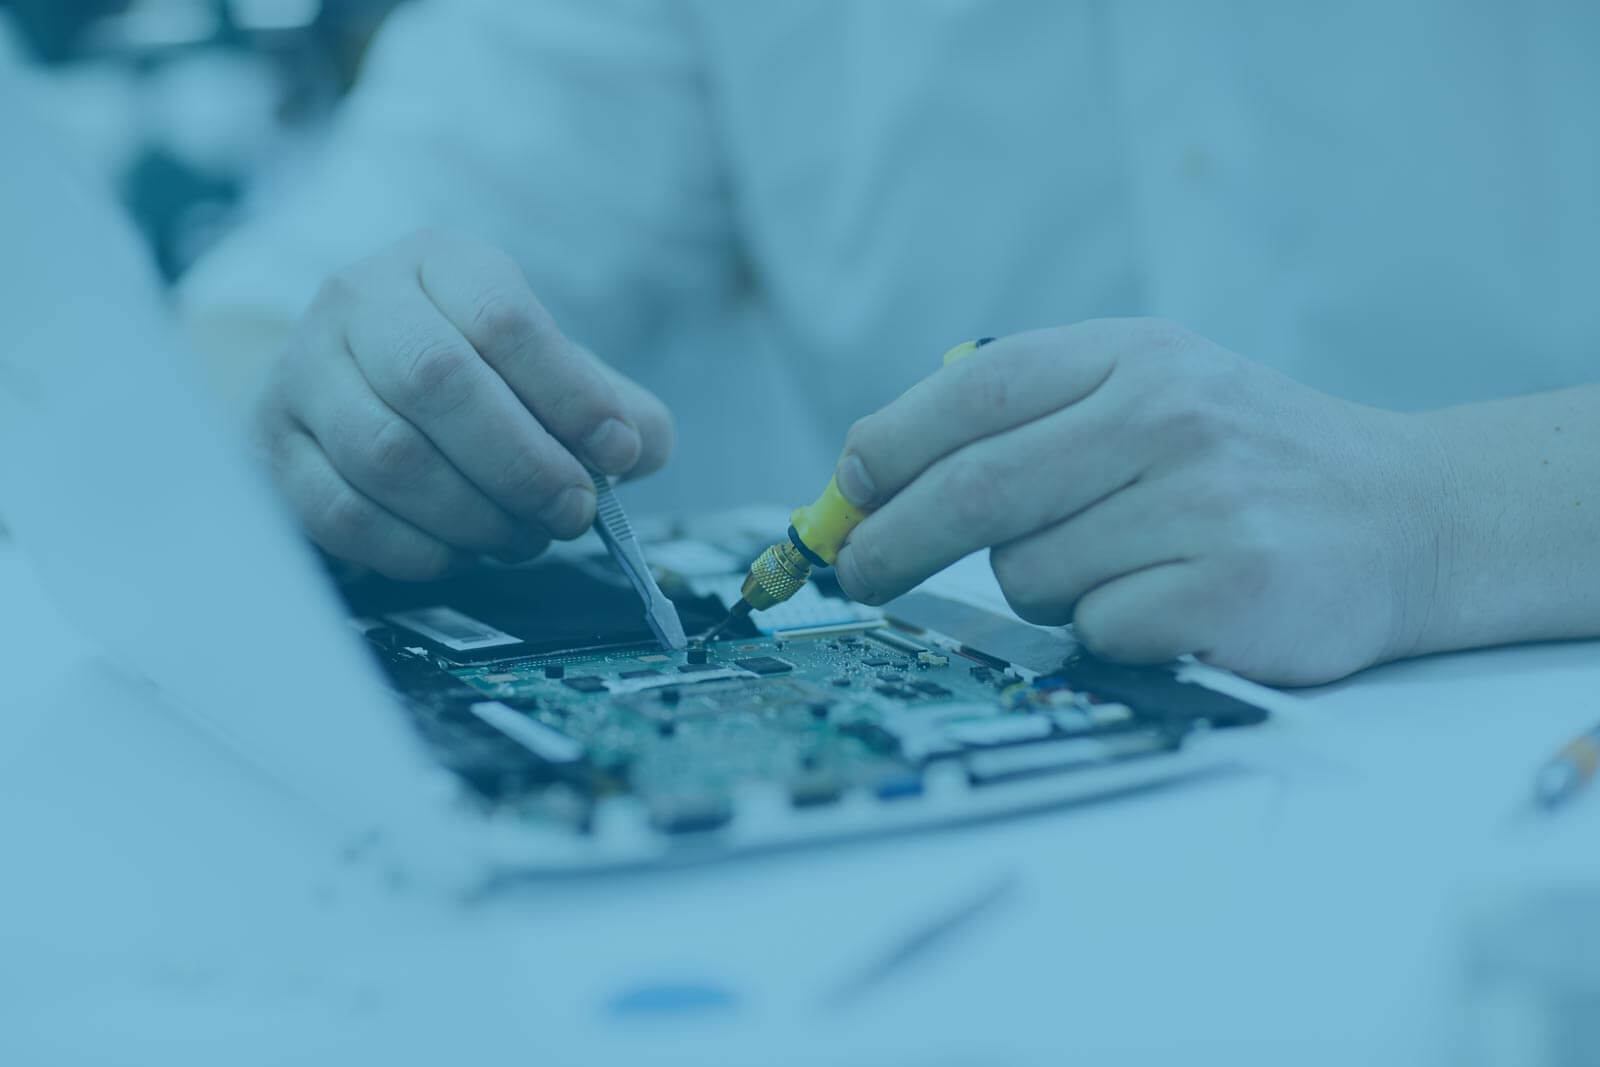 Pcb assembly services